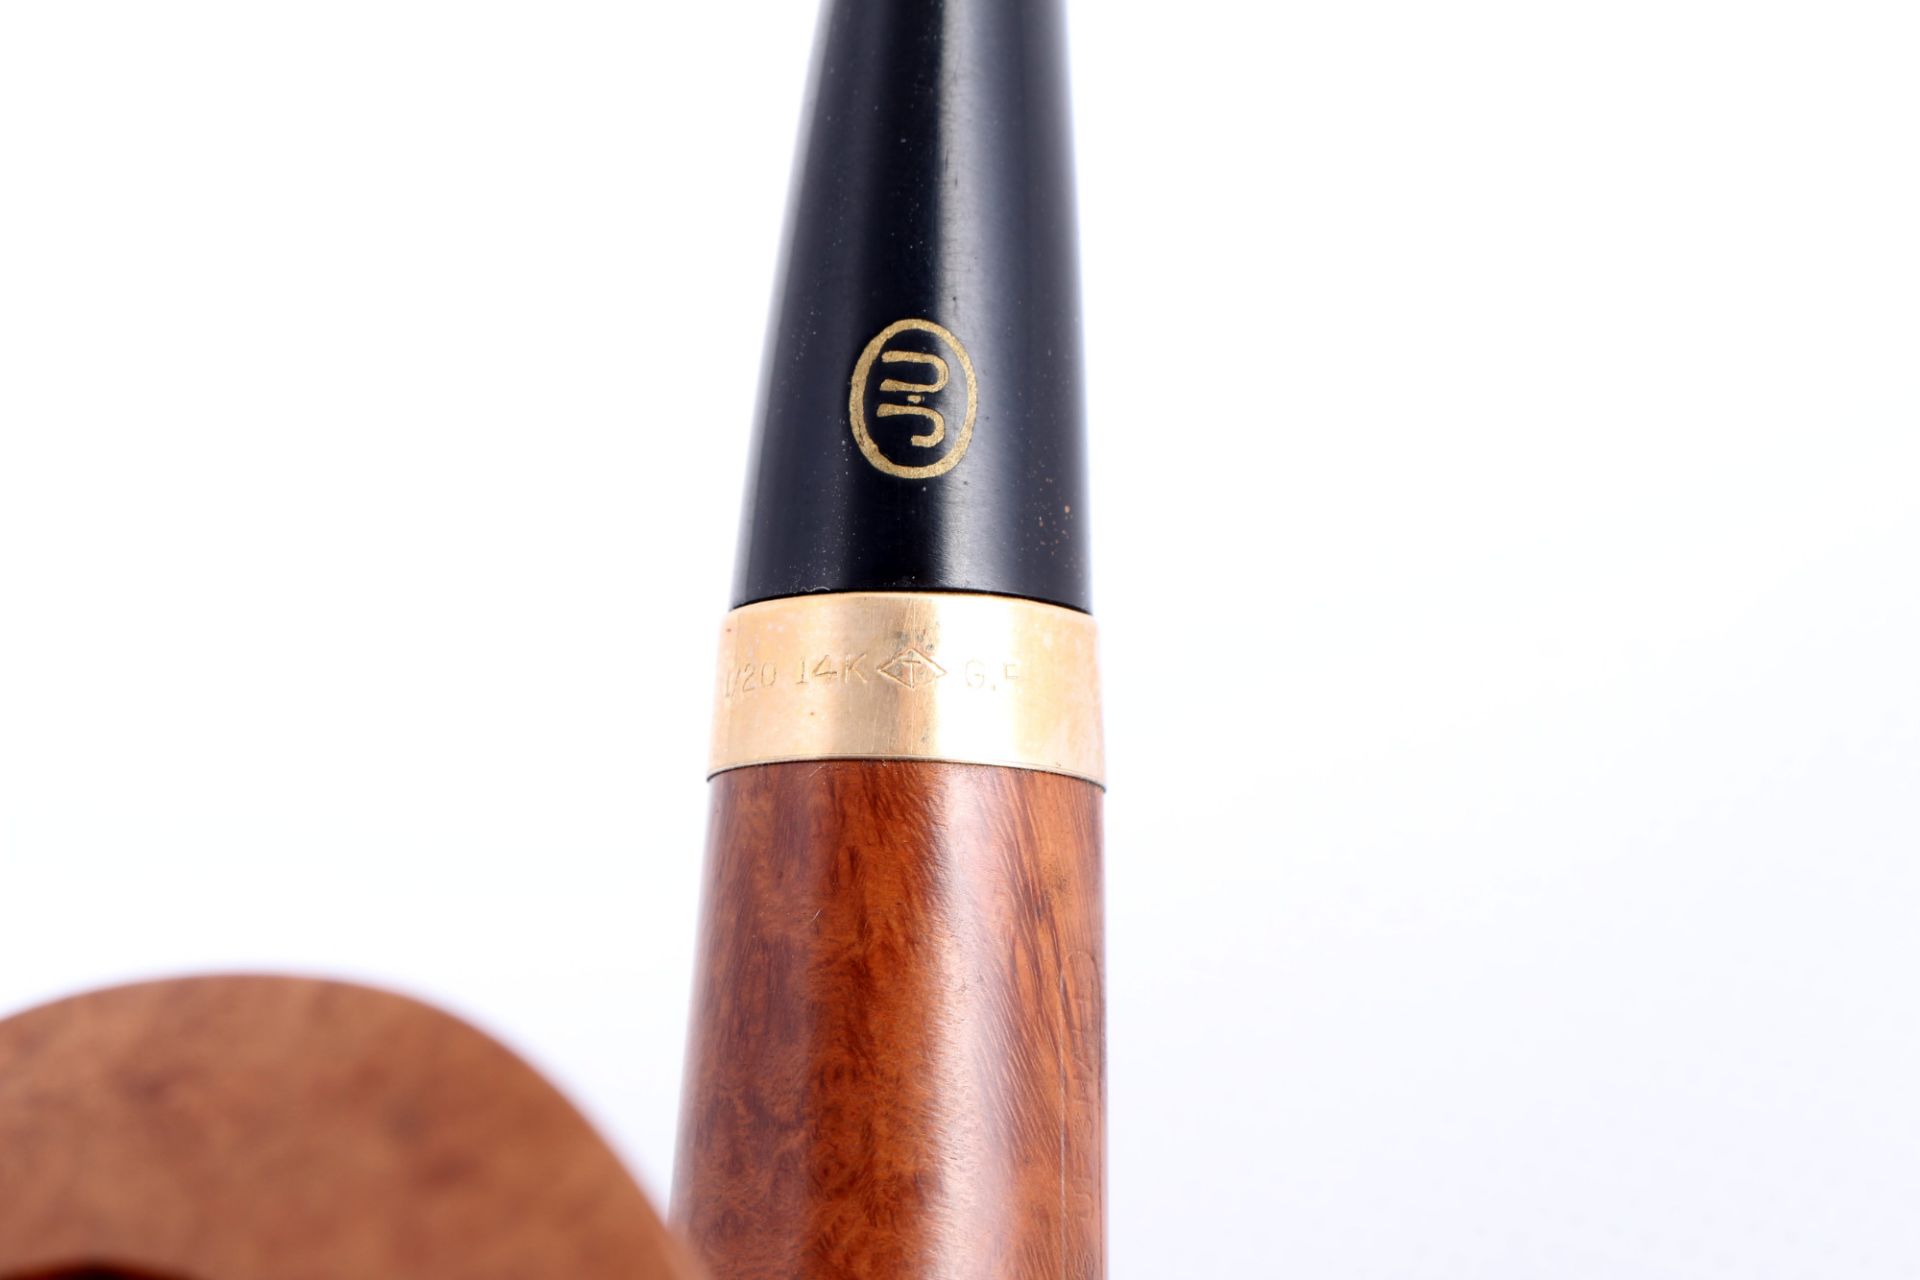 James Upshall tabacco pipe with 14K gold mount, Tabakpfeife mit 585 Gold, - Image 5 of 7